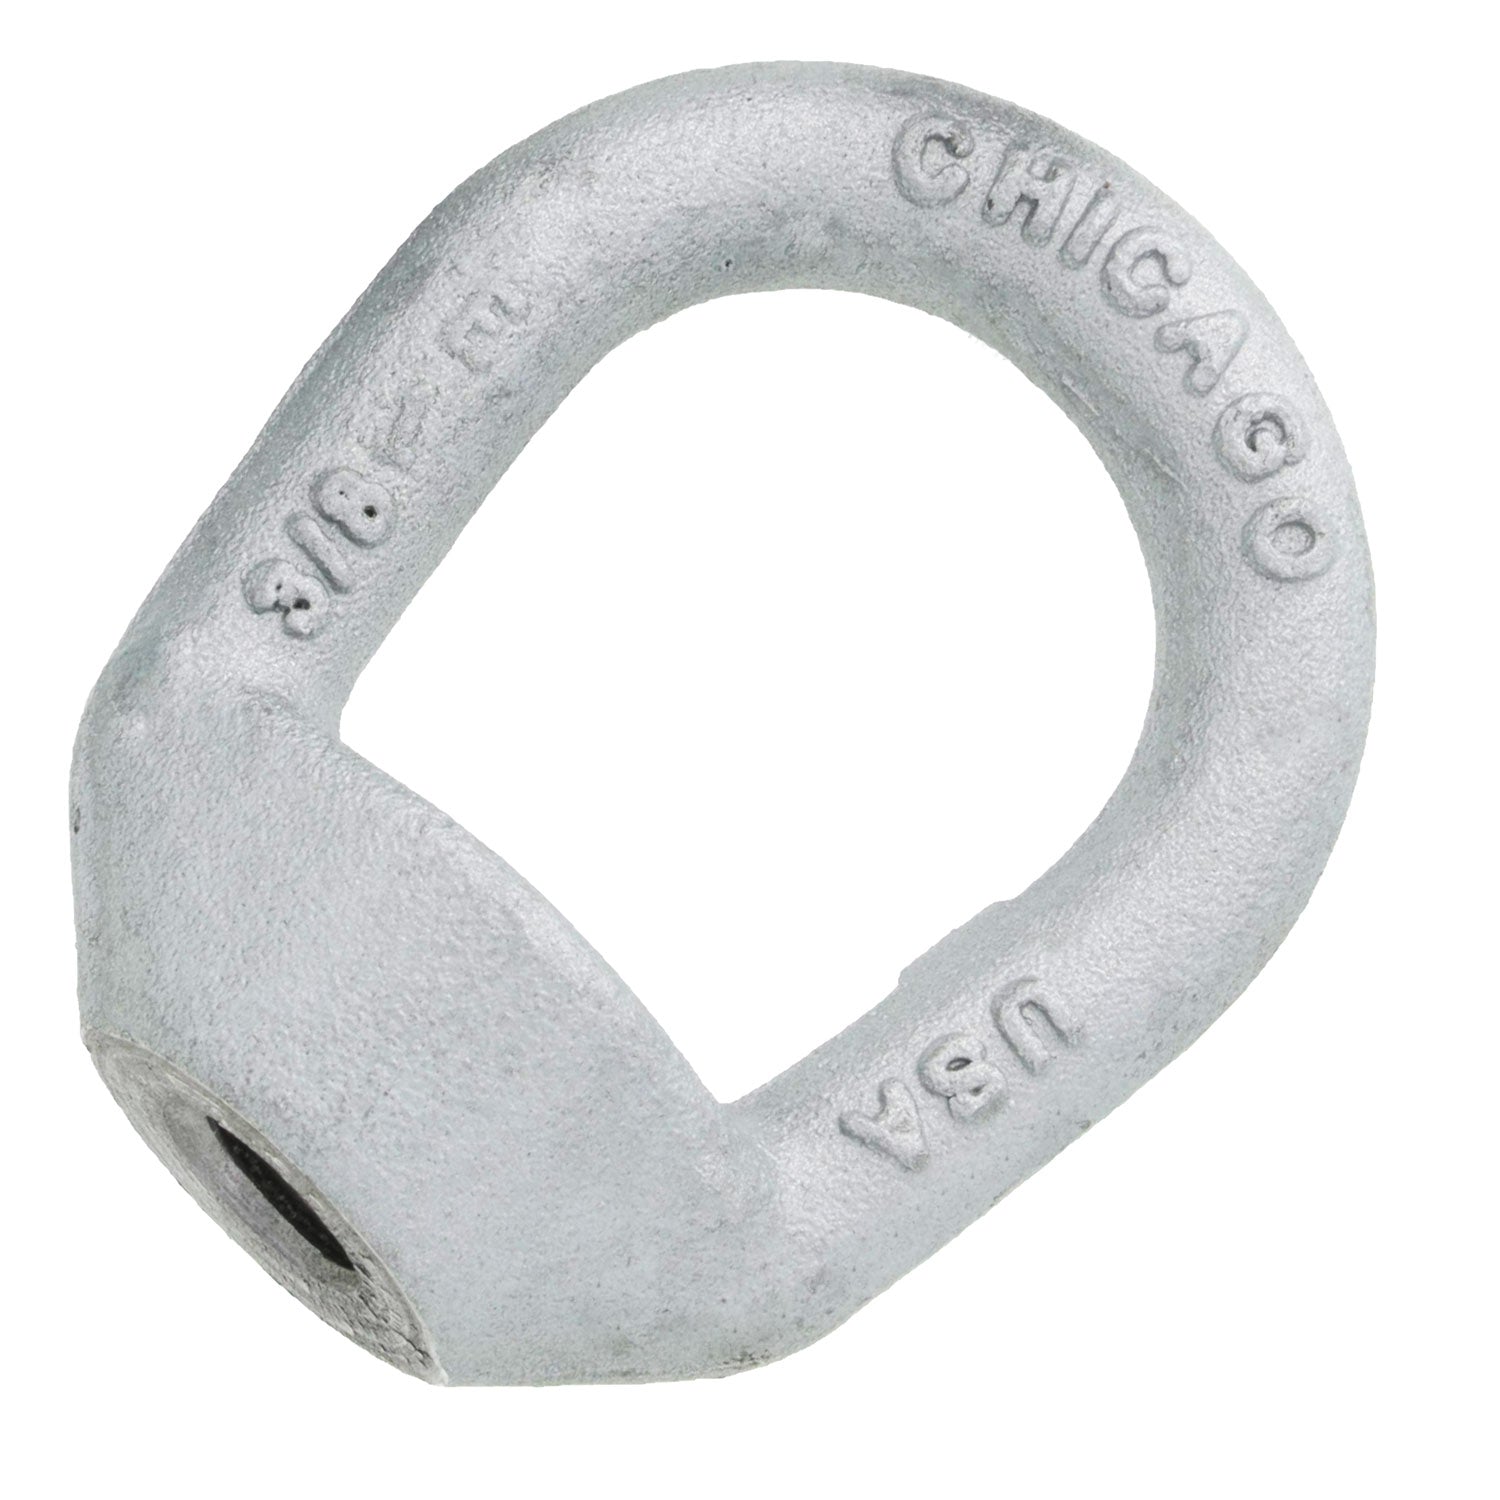 Chicago Hardware Drop Forged Hot Dip Galvanized Metric Eye Nuts